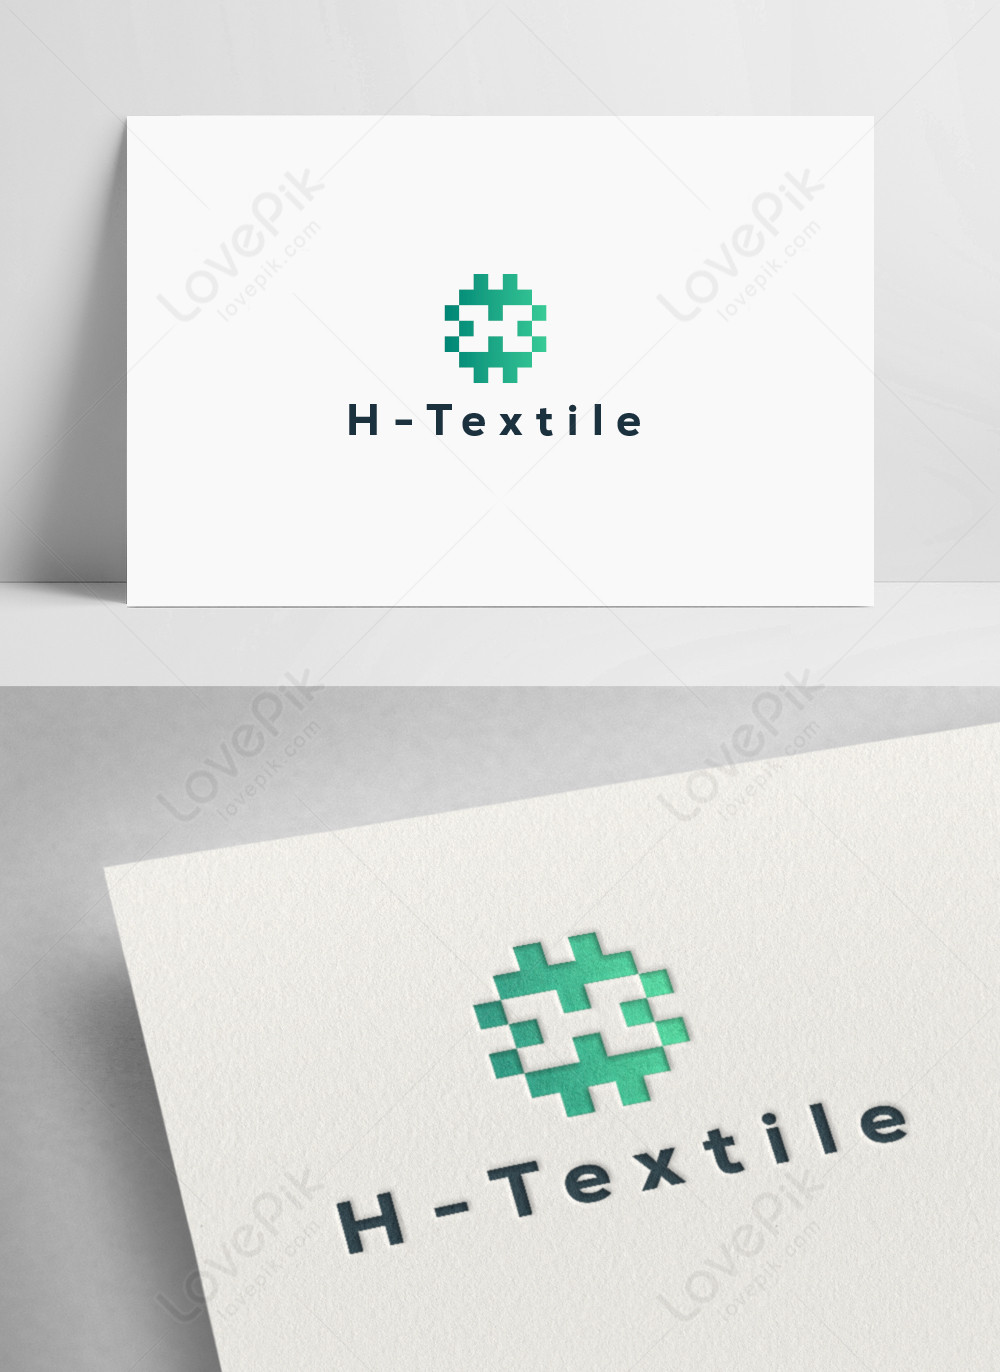 Share more than 141 textile industry logo super hot